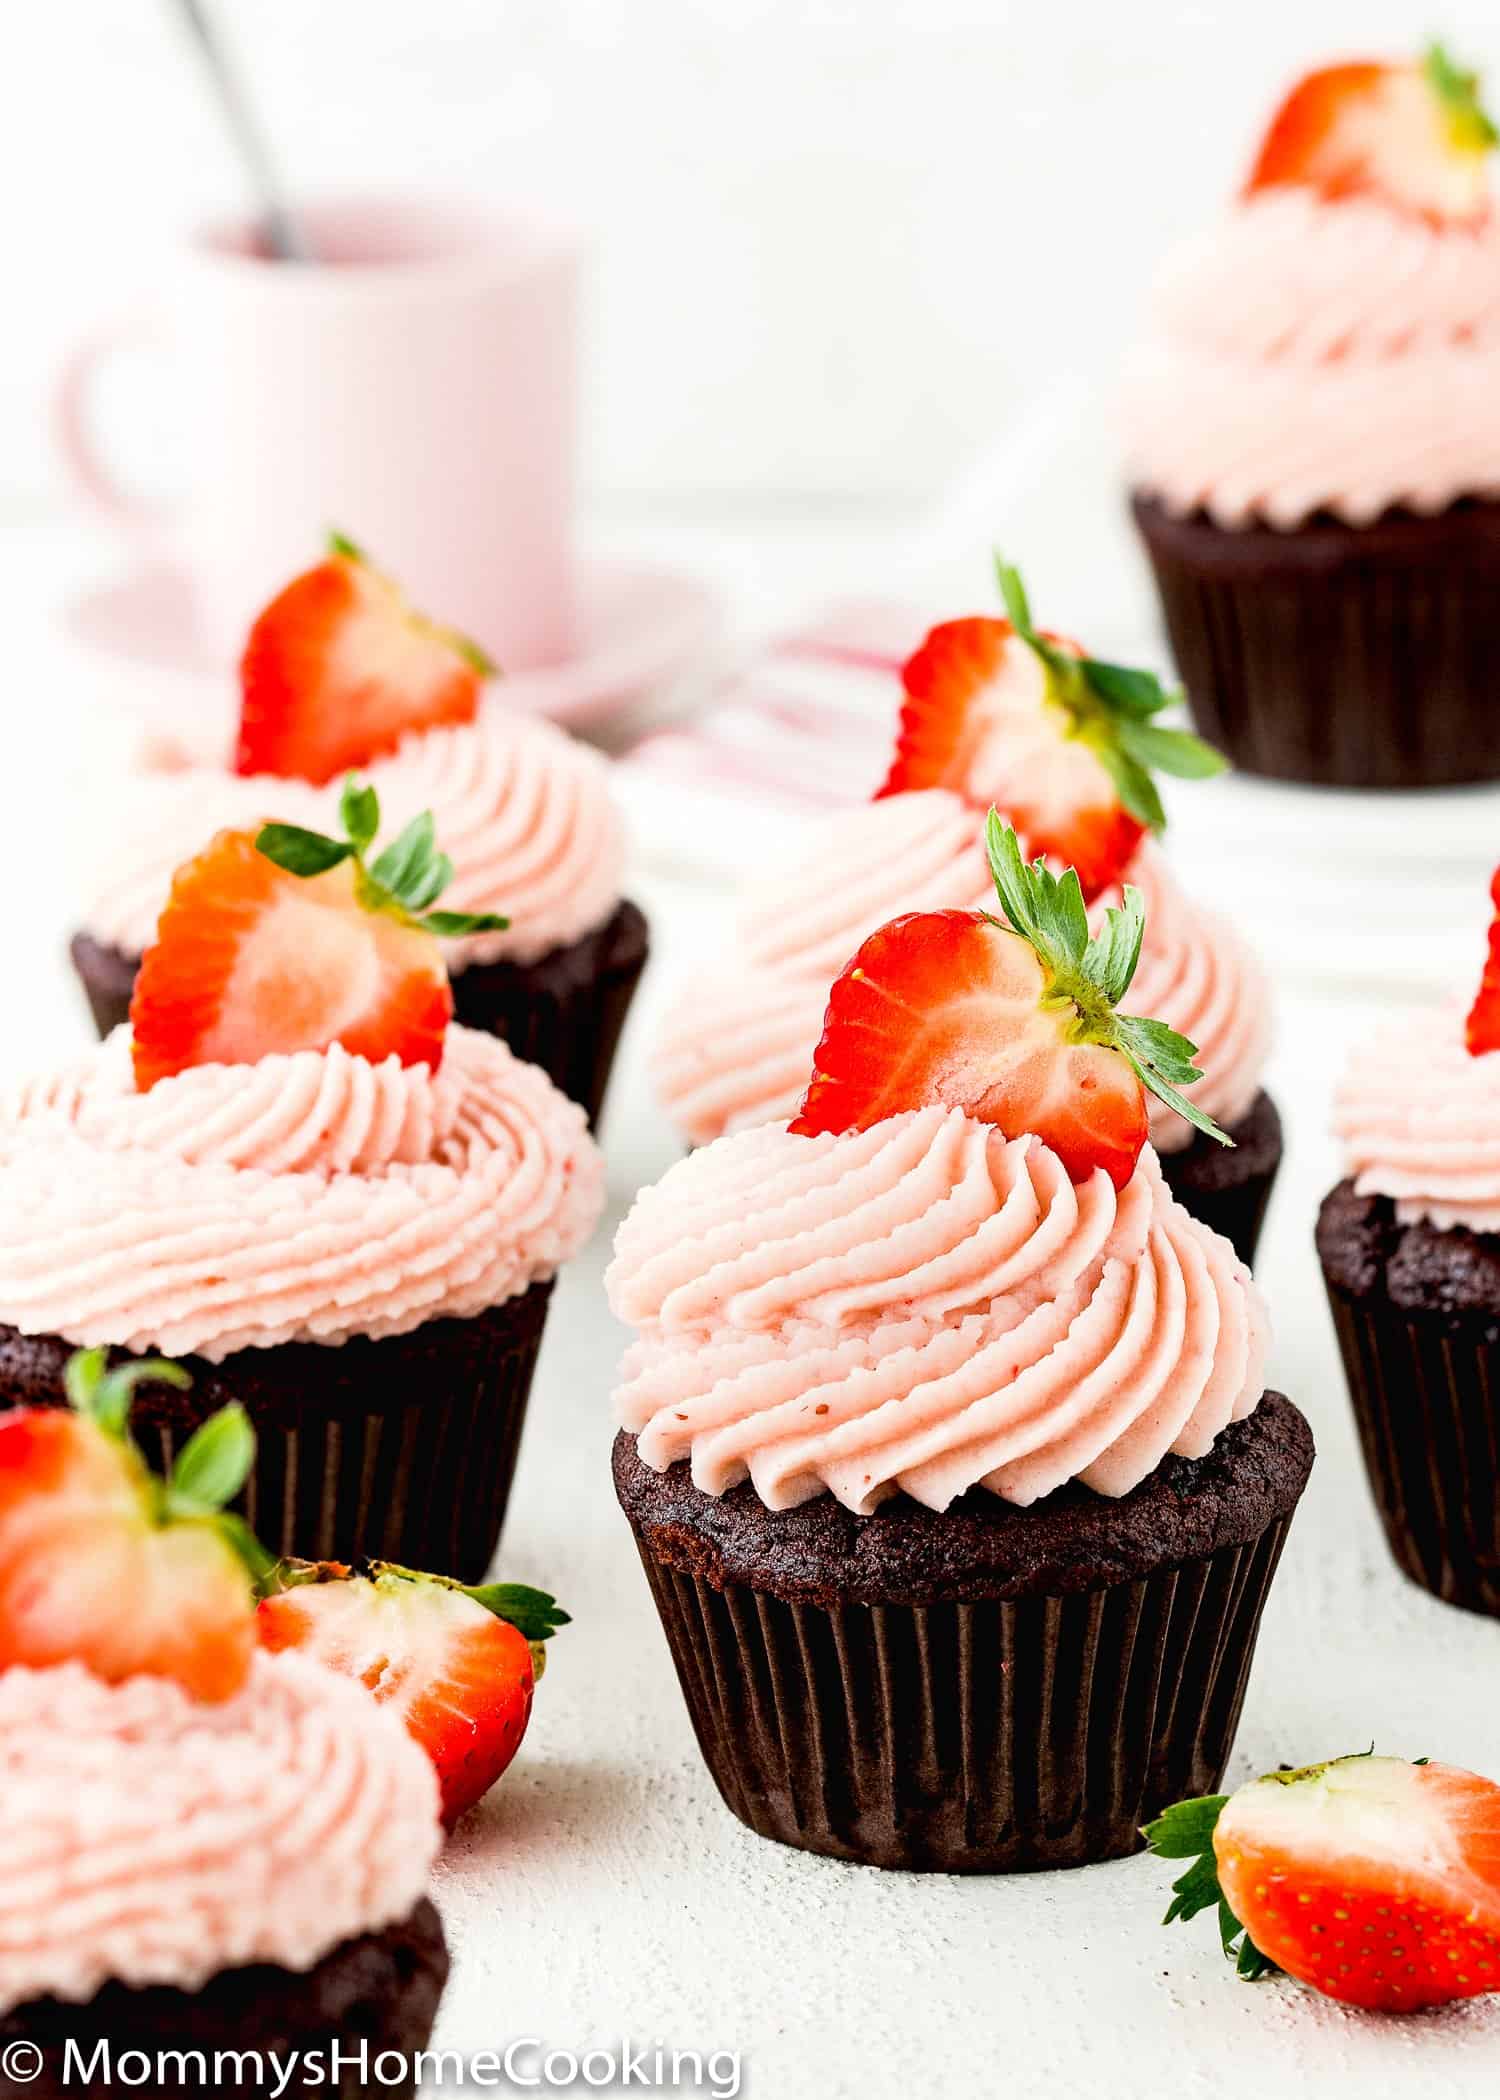 Eggless Chocolate Strawberry Cupcakes with strawberry buttercream and fresh strawberries.